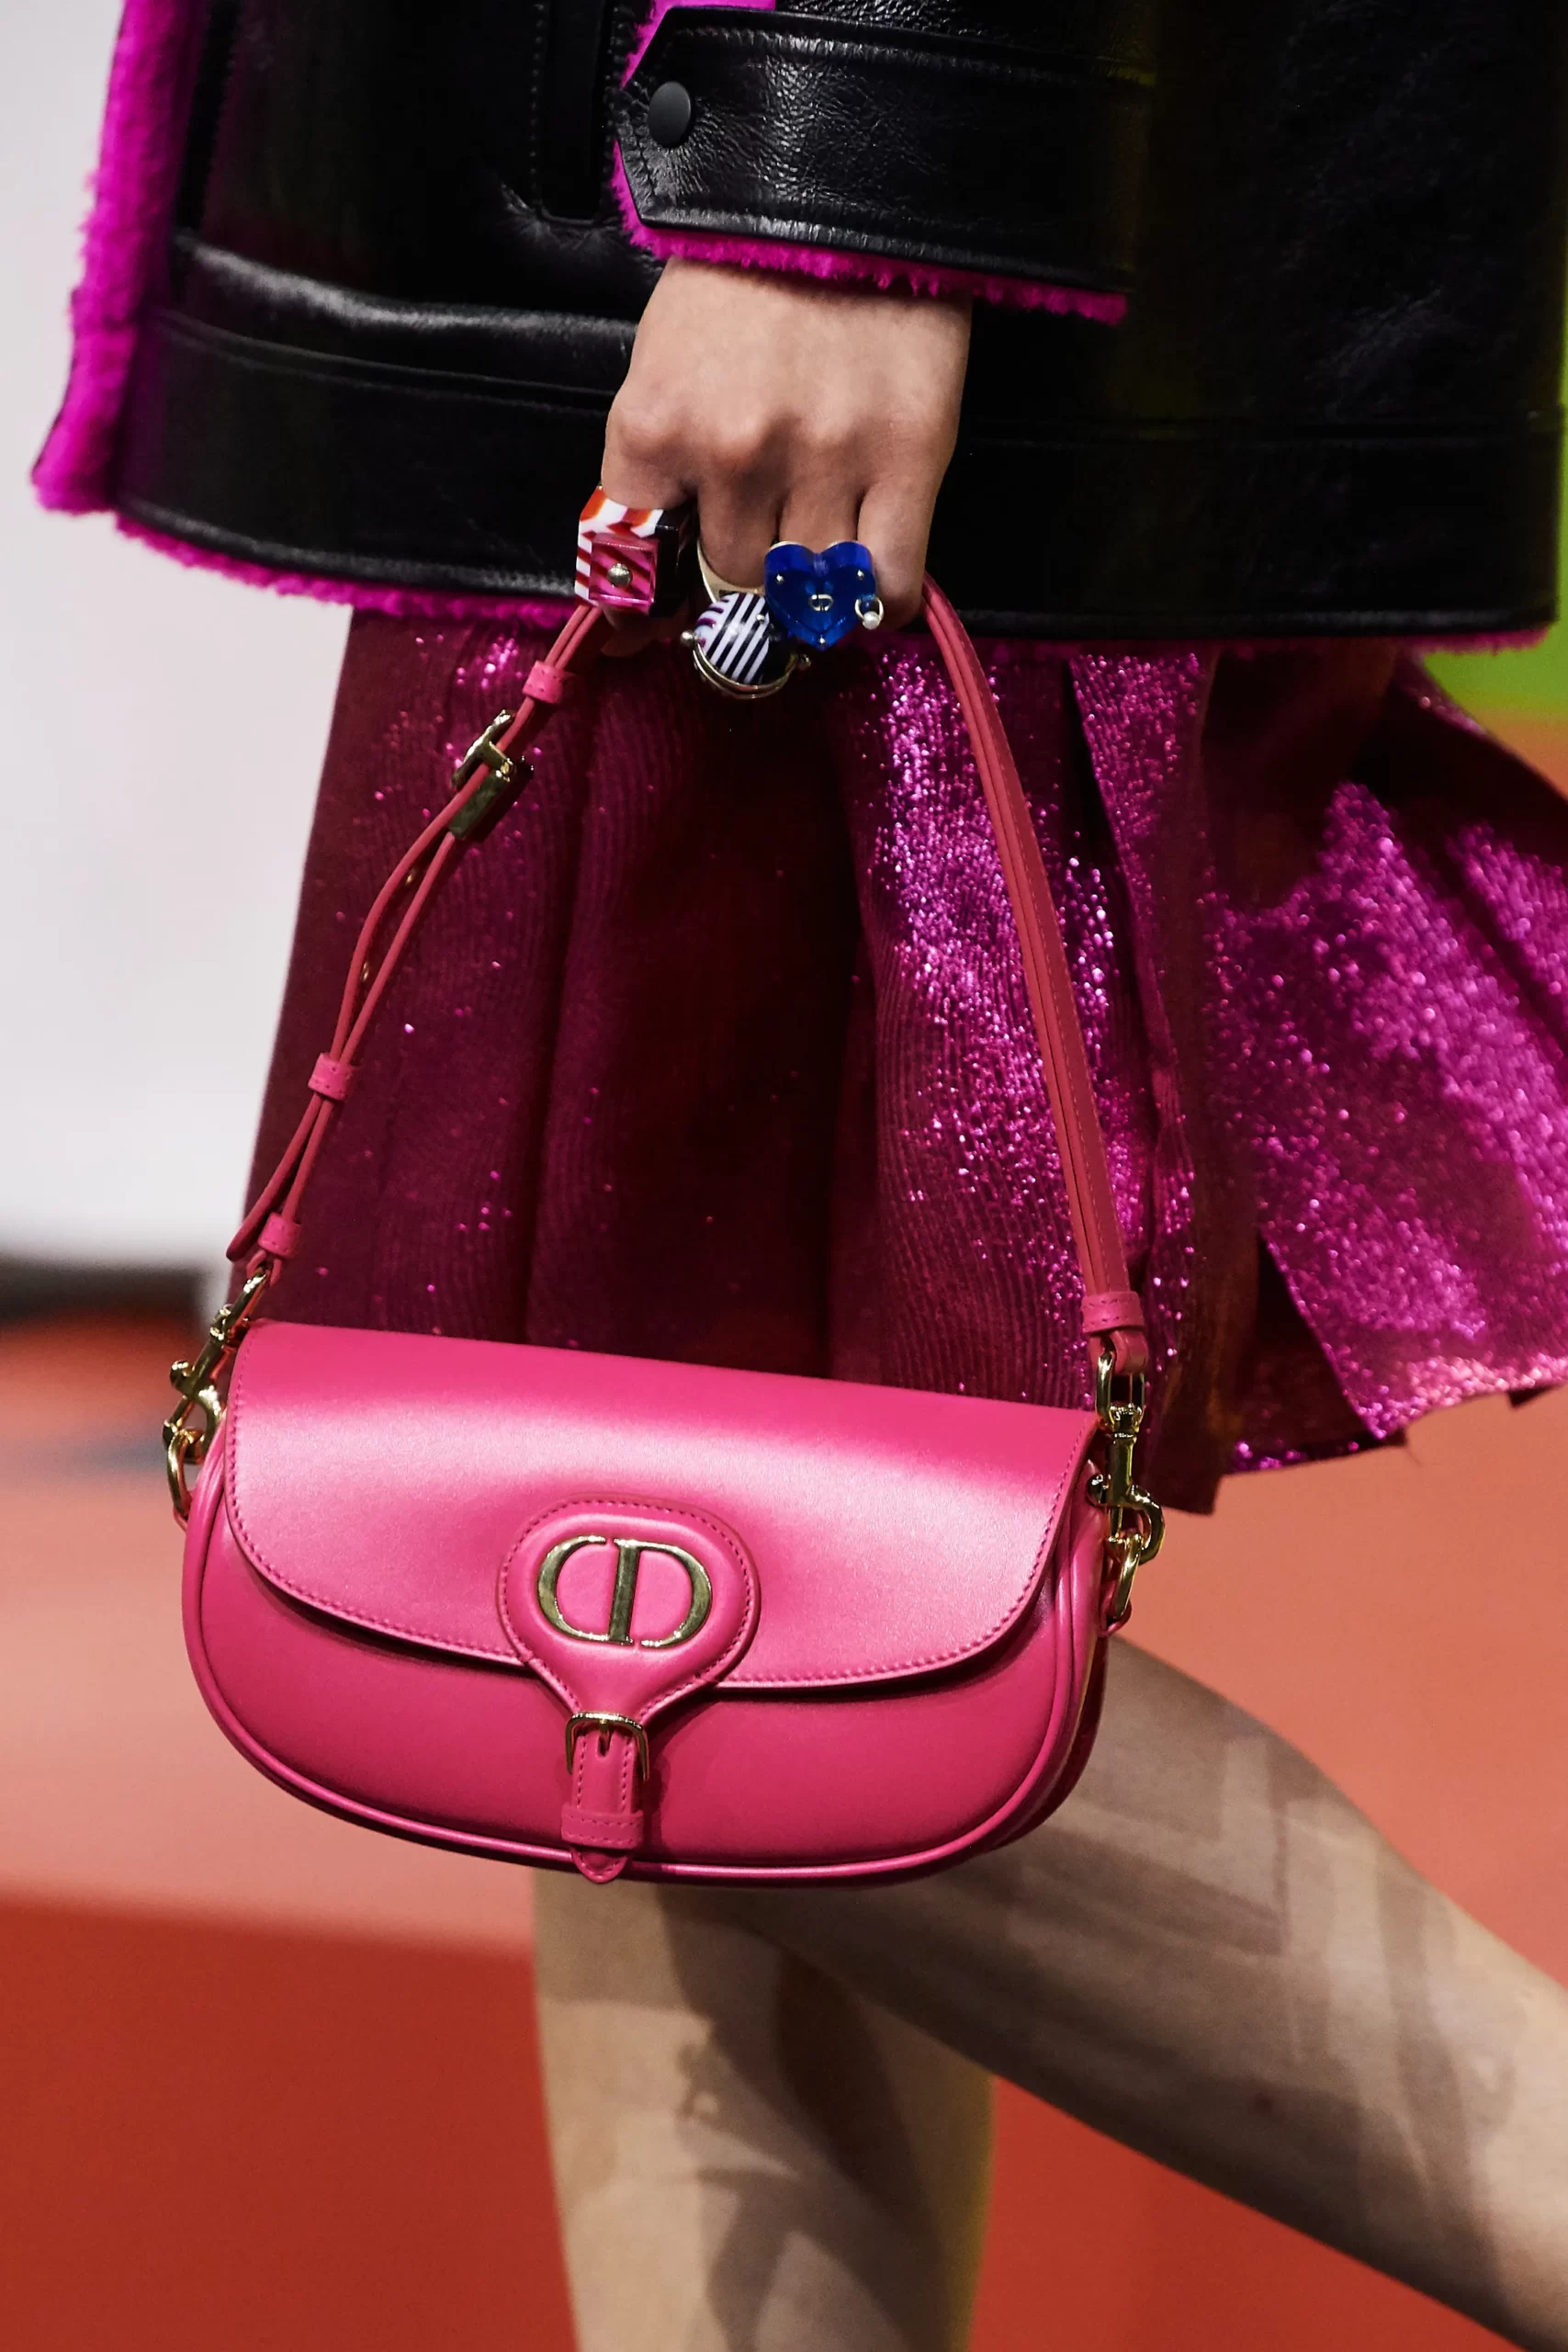 Dior Mini Bags and Belt Bags From Spring/Summer 2020 - Spotted Fashion